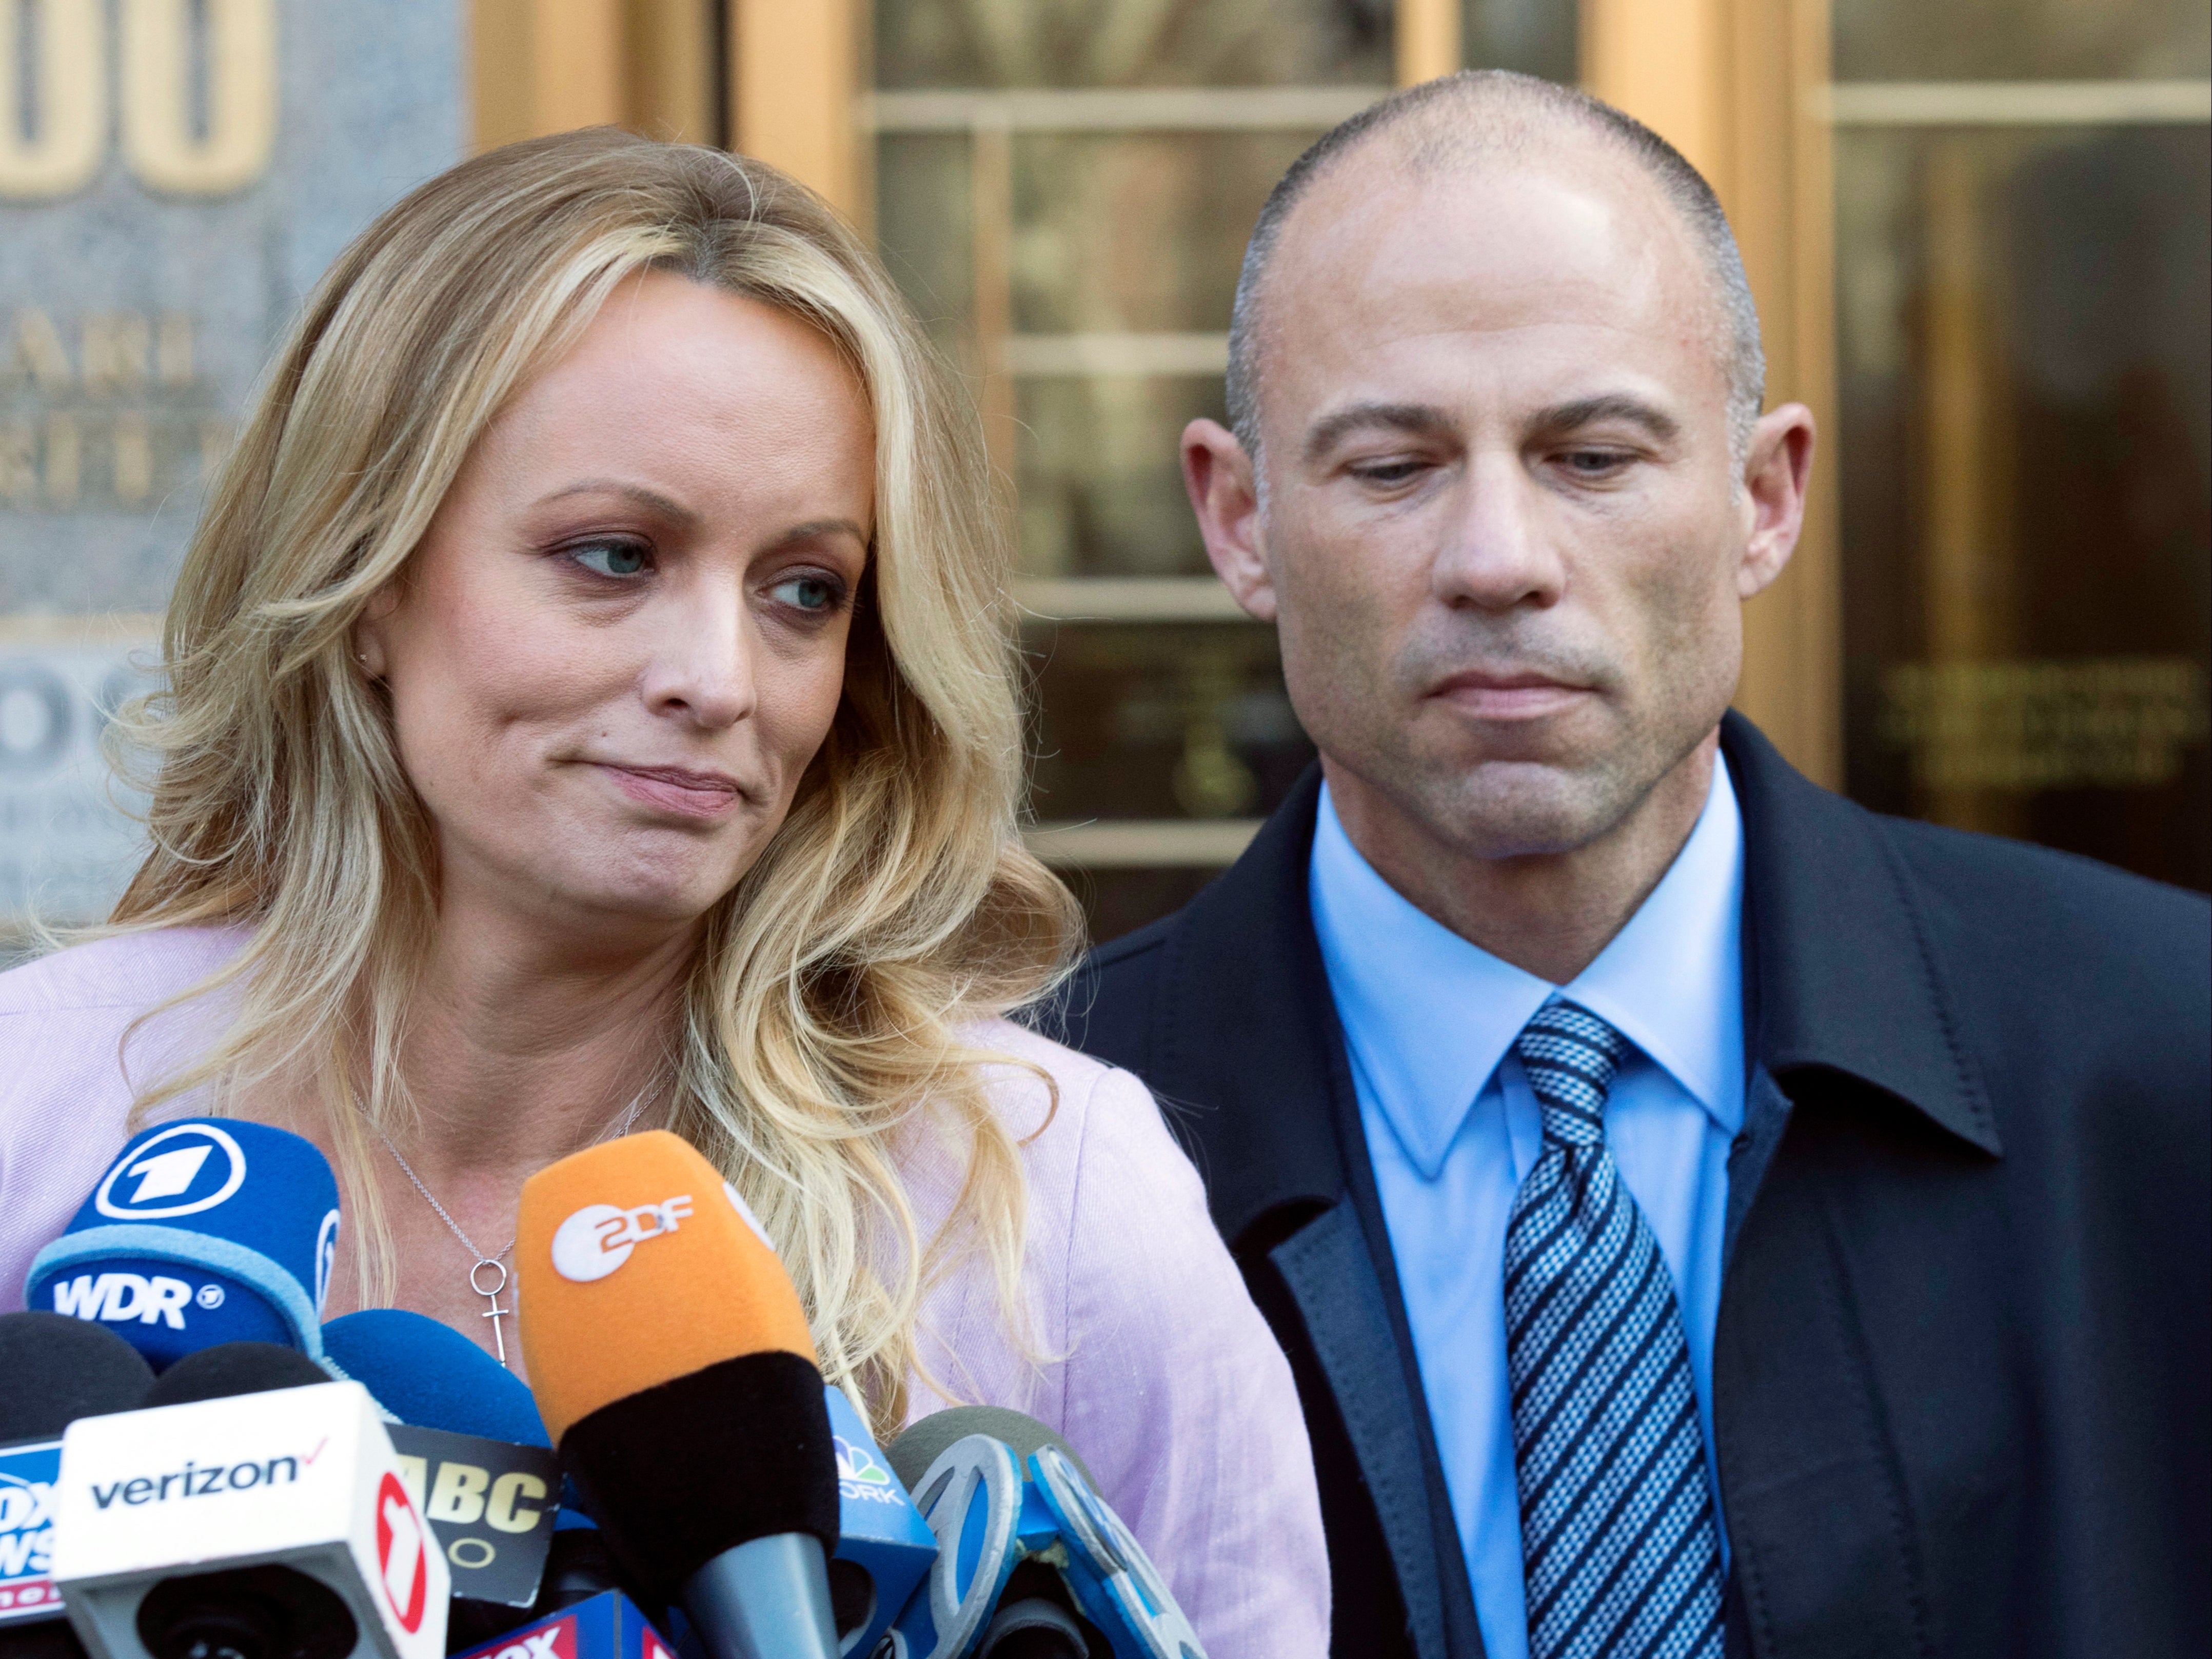 Stormy Daniels and Michael Avenatti talk to the media as she leaves federal court in New York in 2018. For a time, the pair – and especially the outspoken Avenatti – were ubiquitous on television